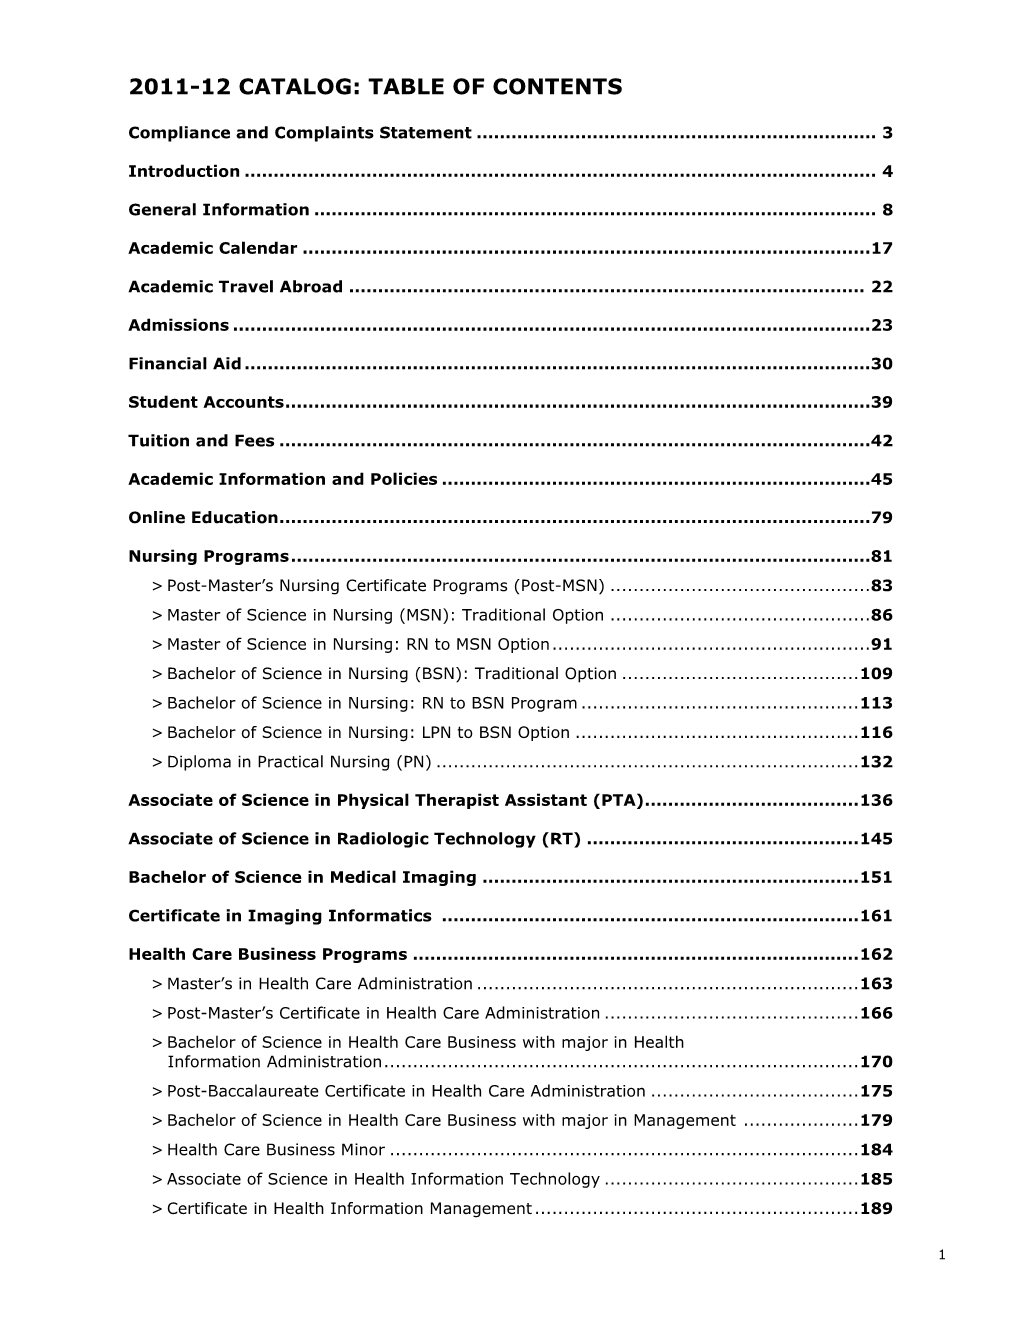 2011-12 Catalog: Table of Contents